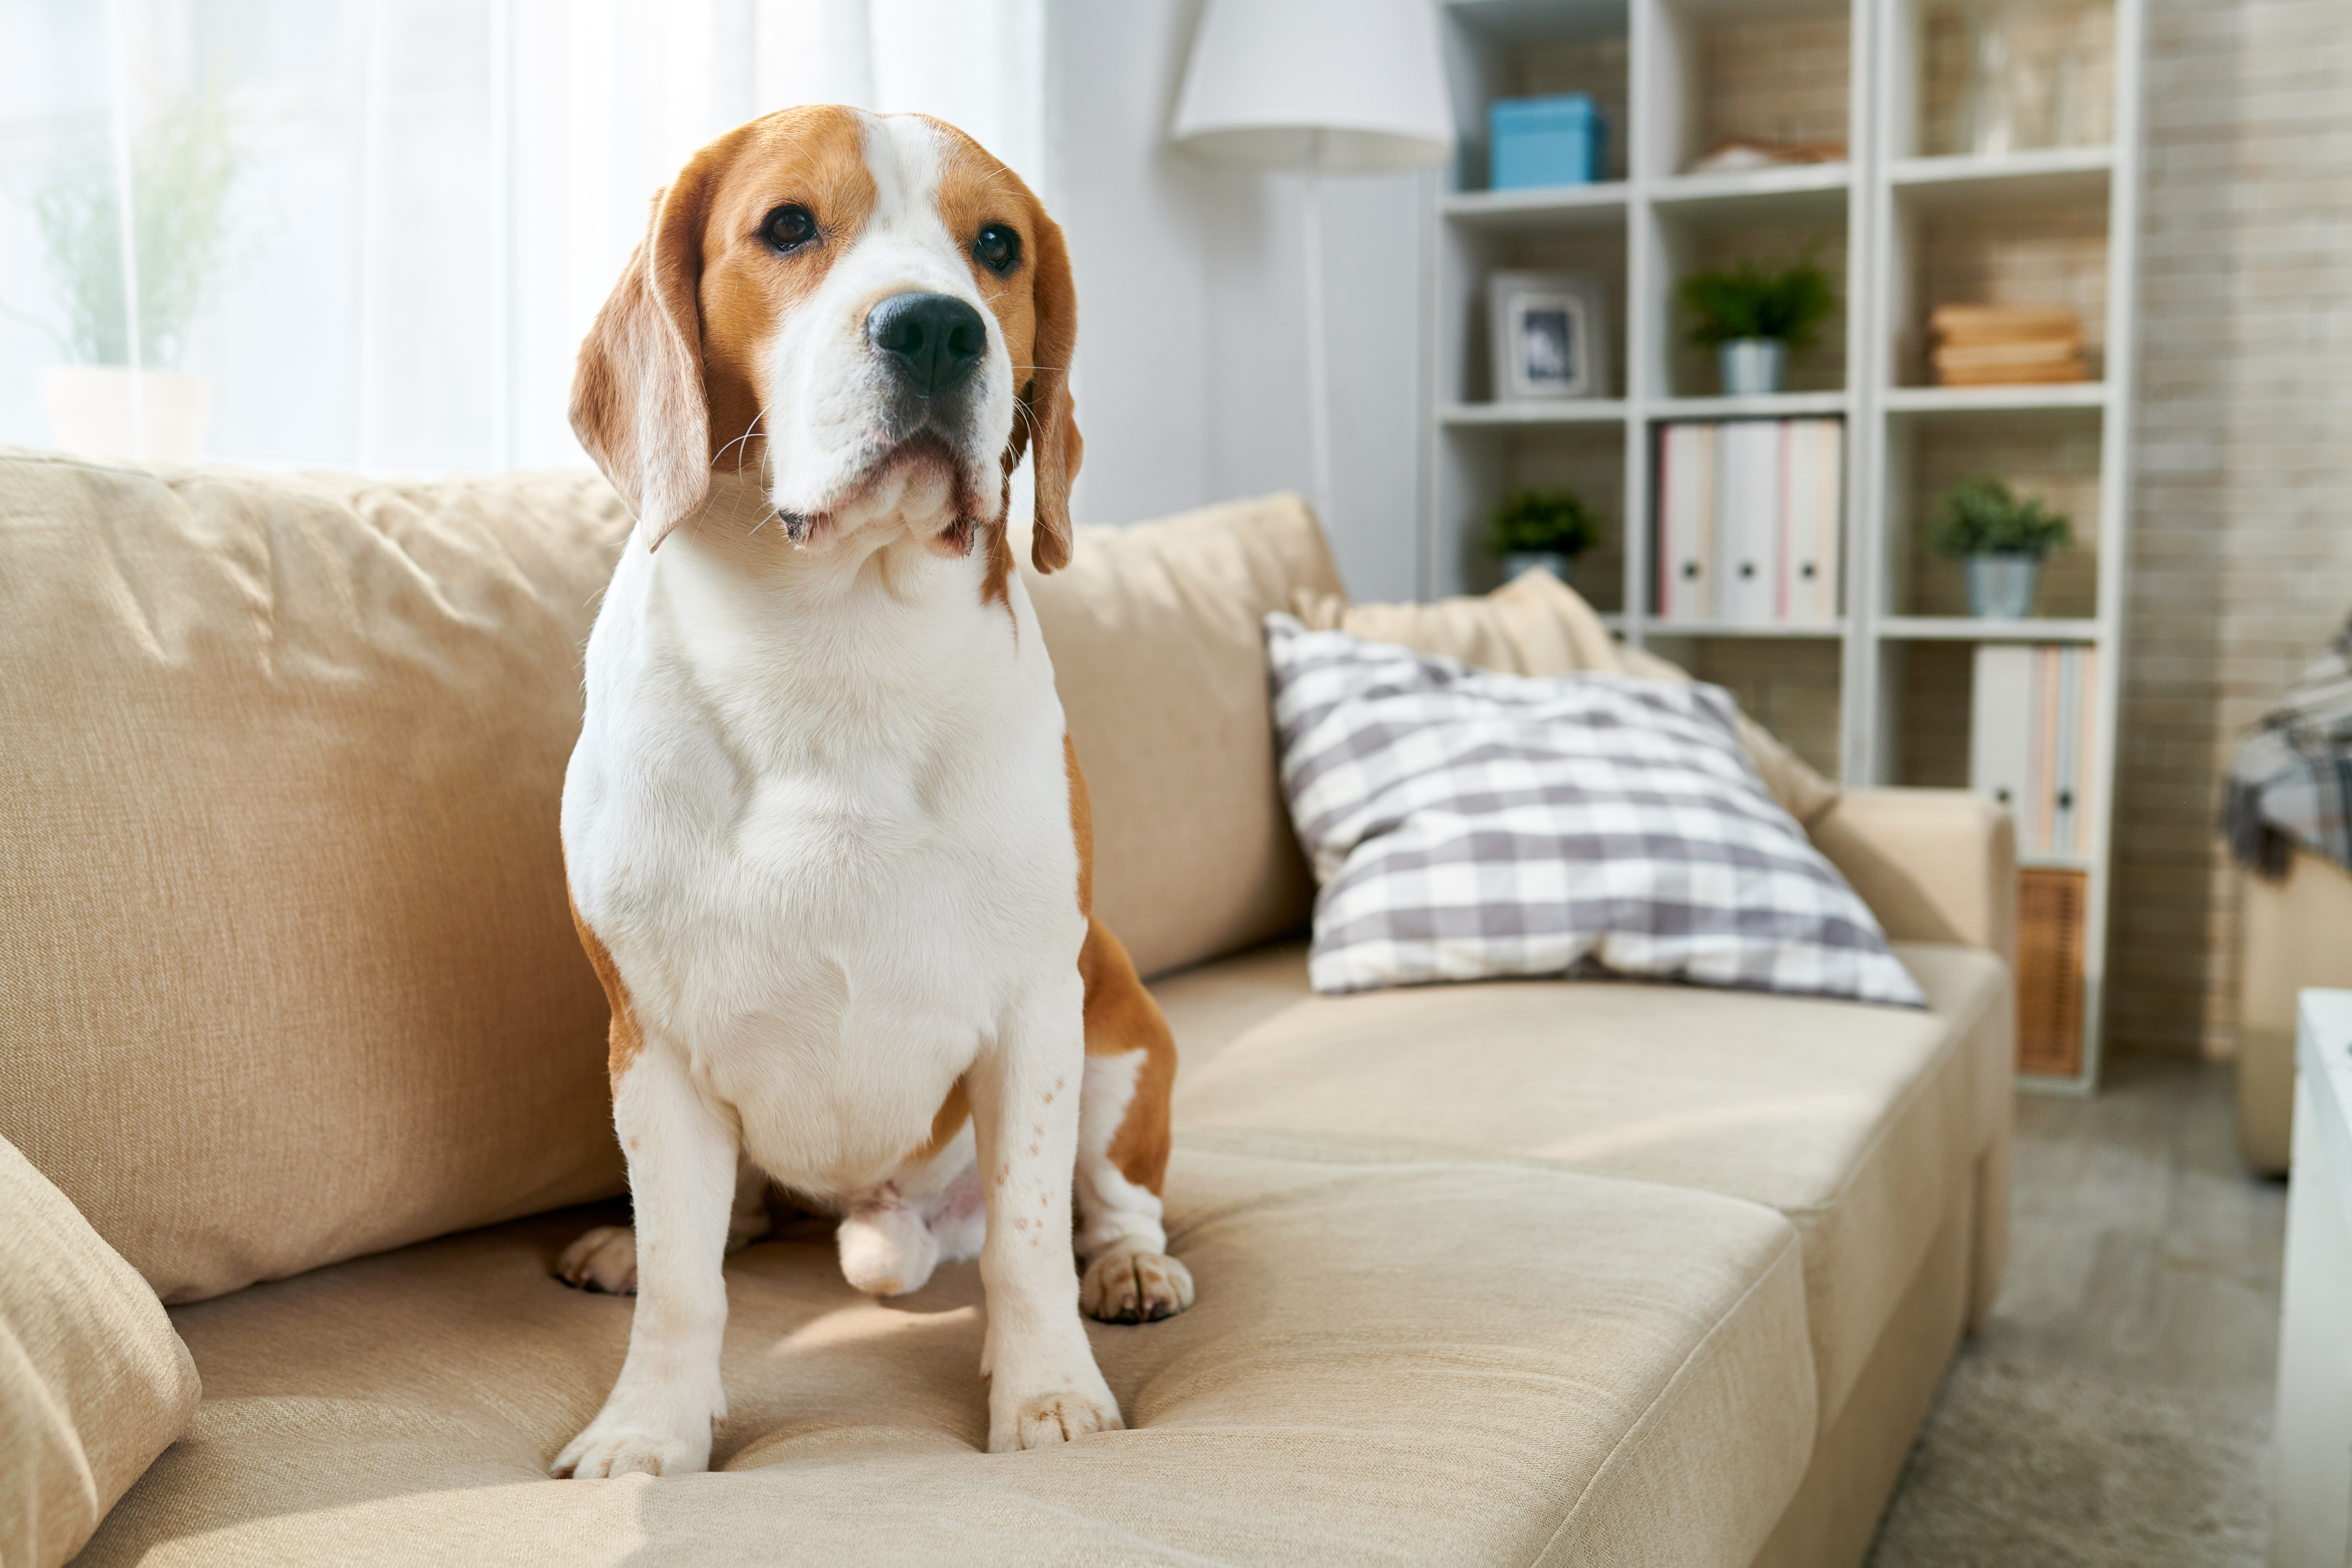 Here are some key points to consider before you agree to pet sit.